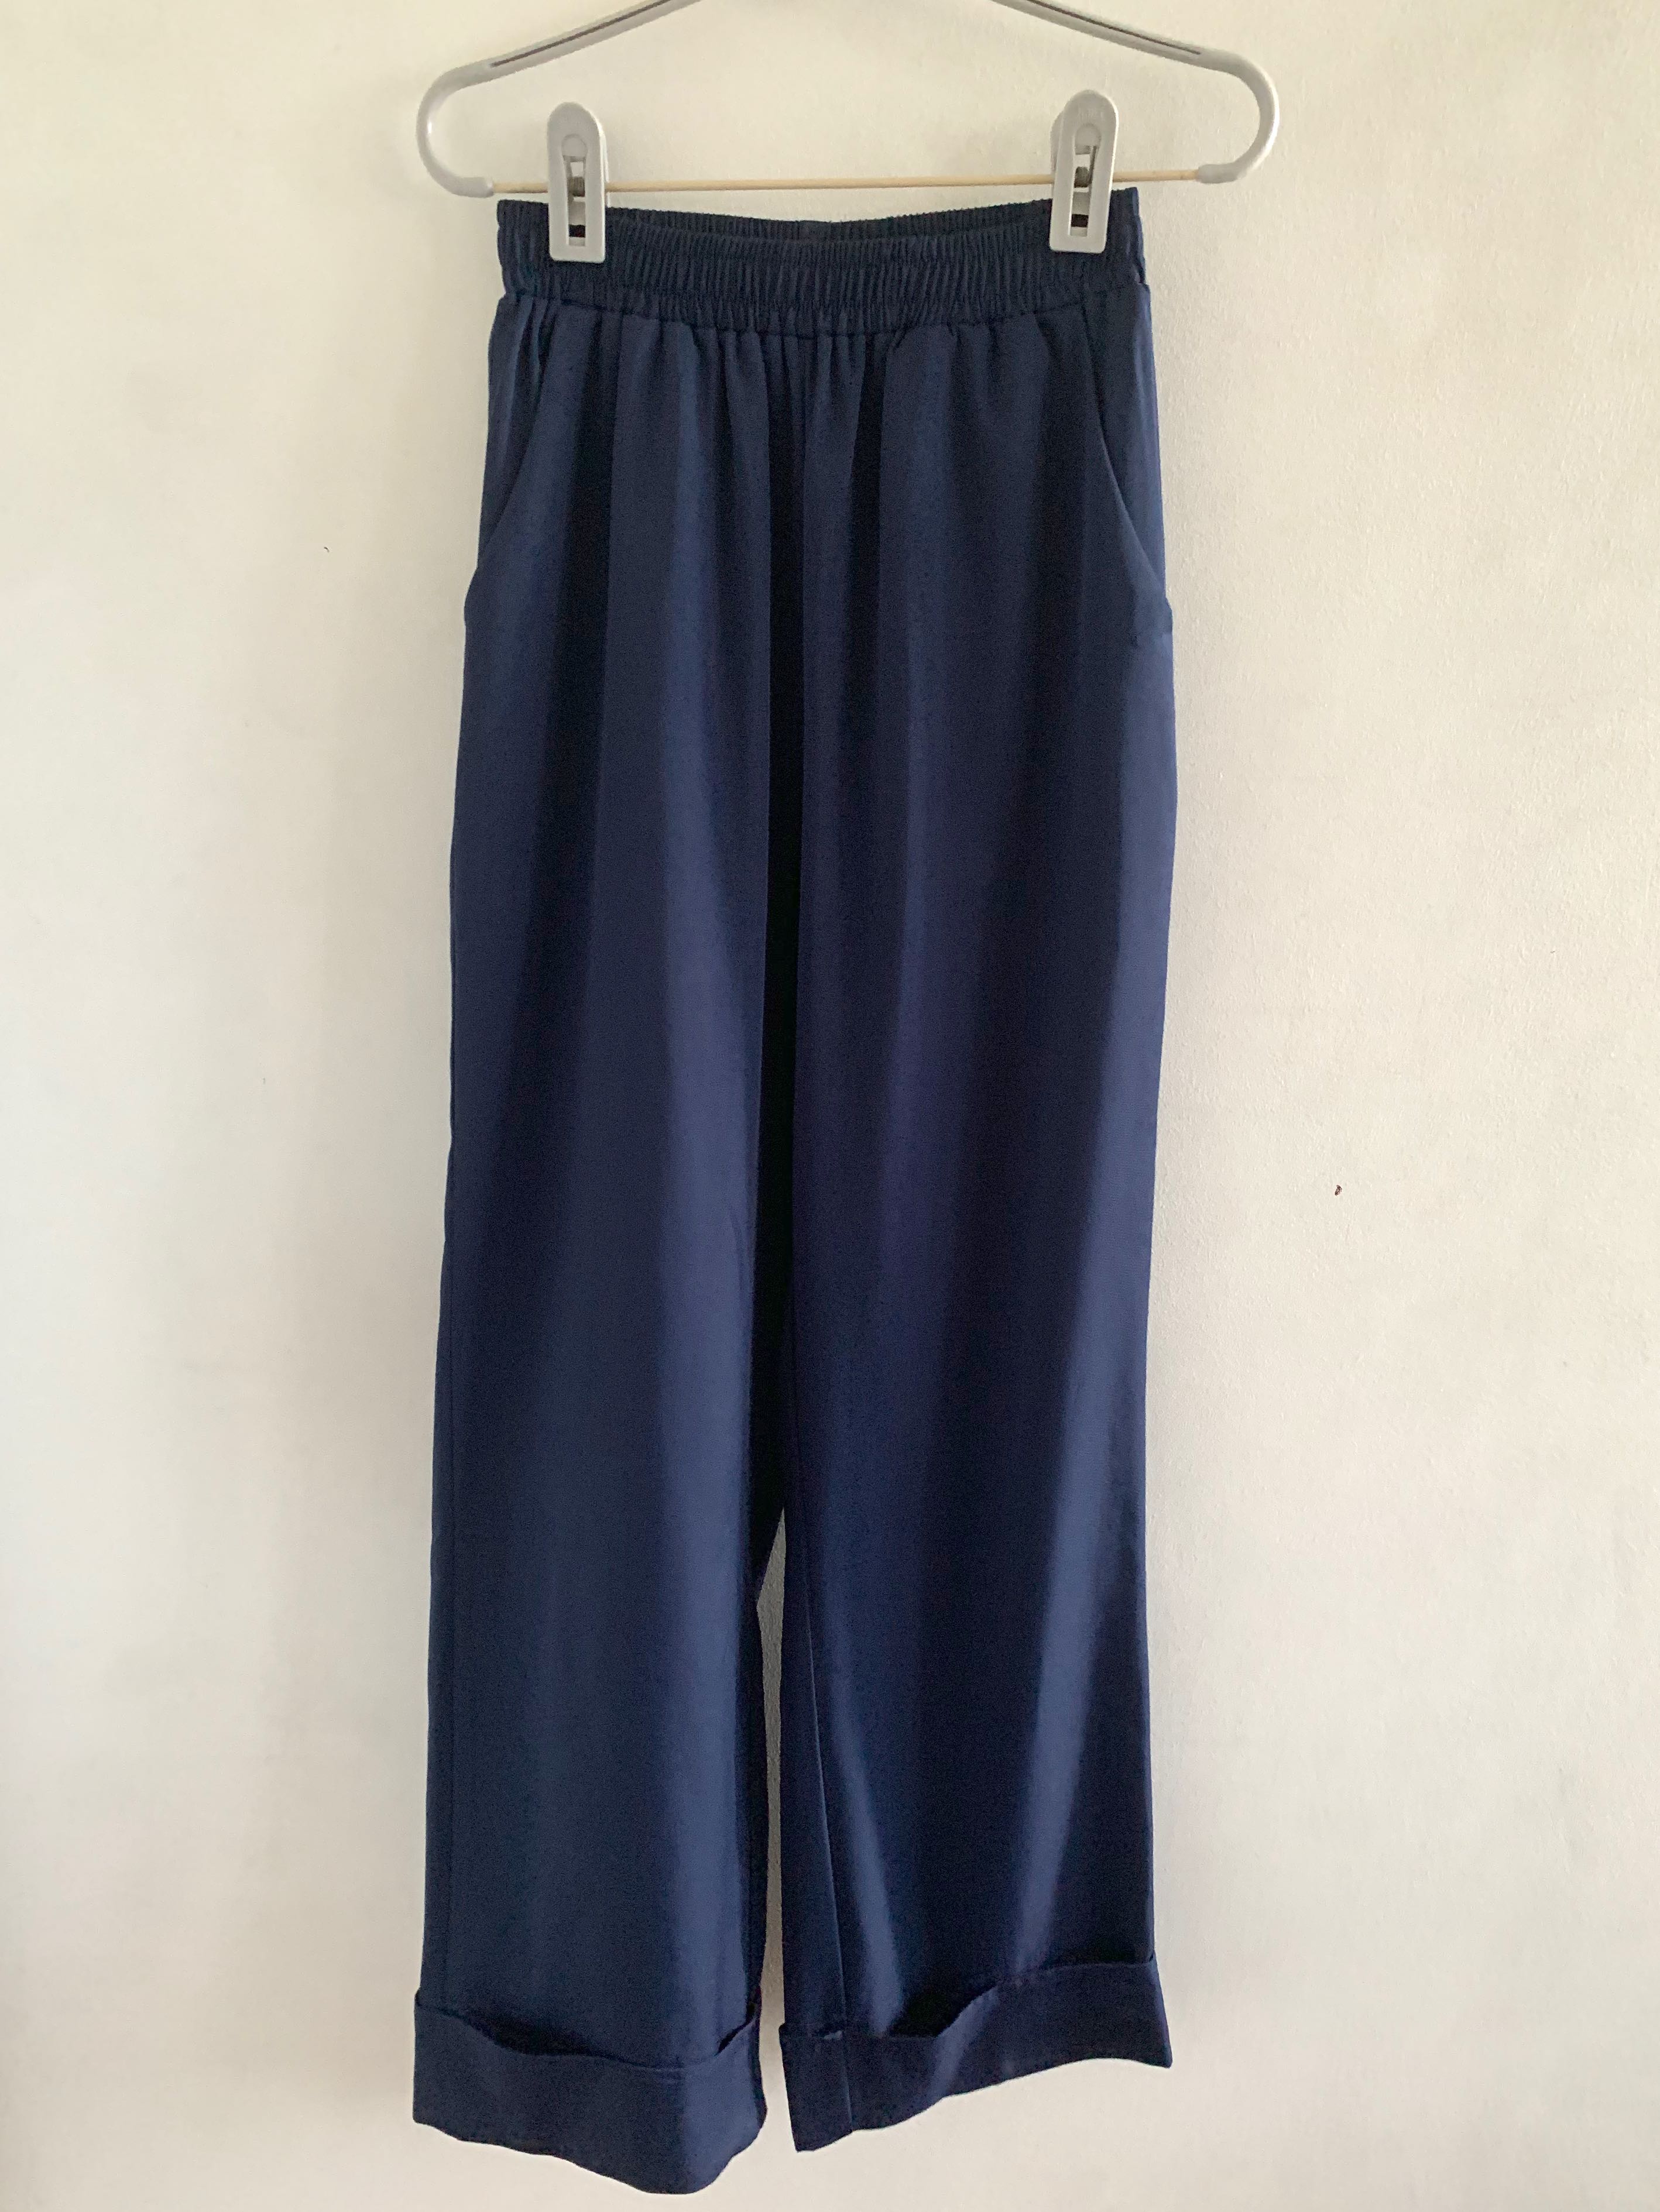 Navy Blue Elastic Band Pants, Women's Fashion, Bottoms, Other Bottoms ...